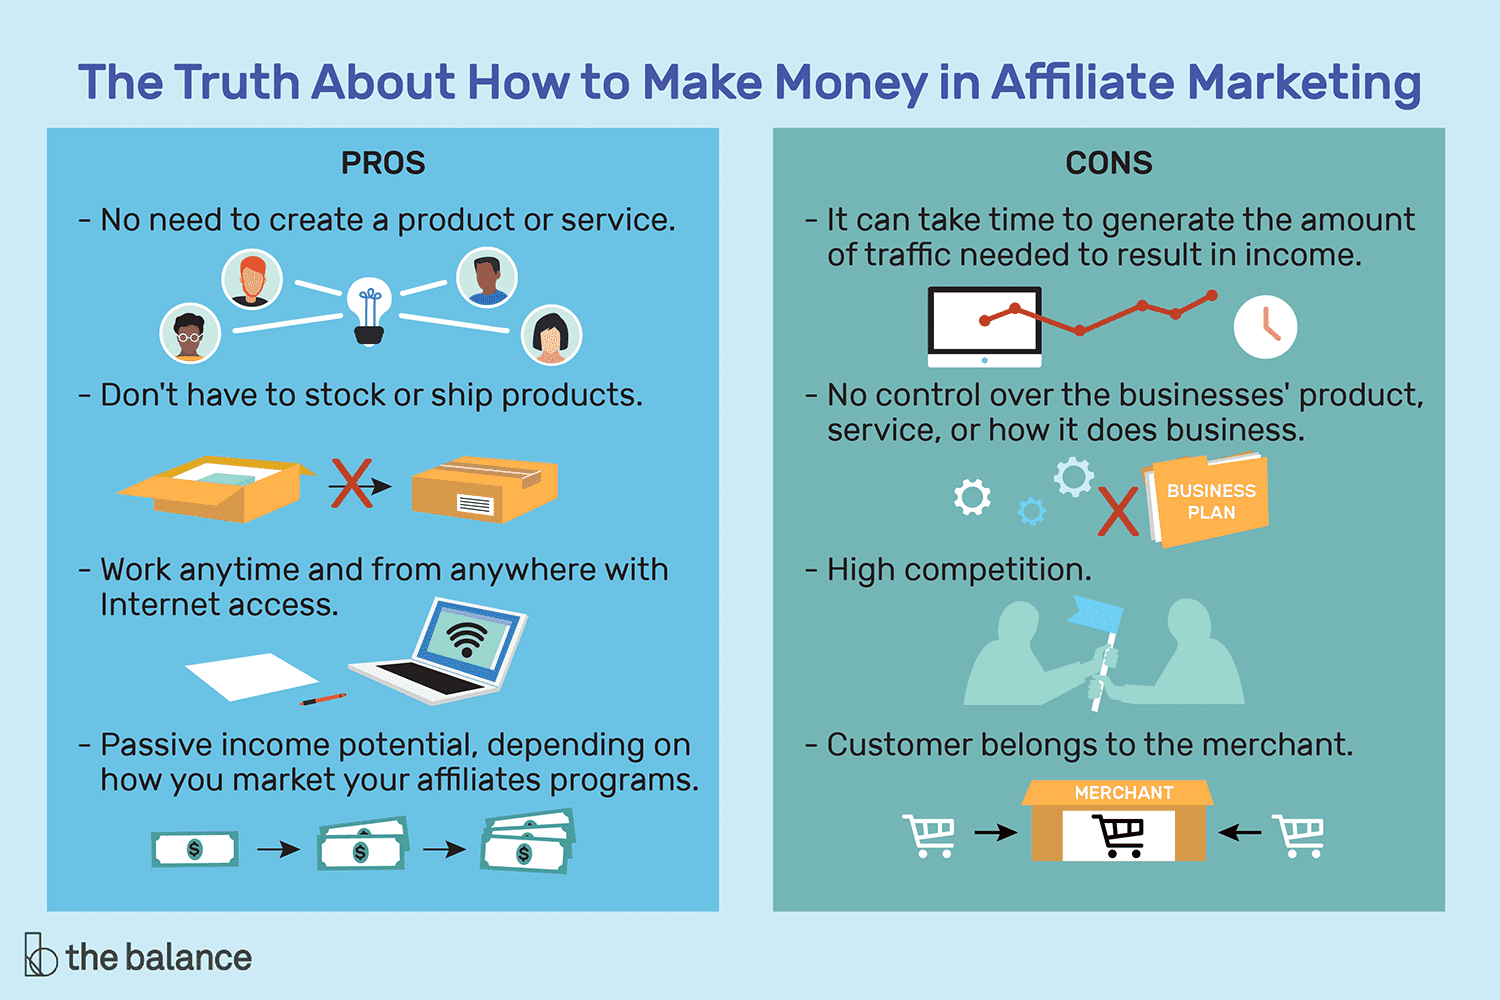 Pros and cons of investing in Affiliate marketing